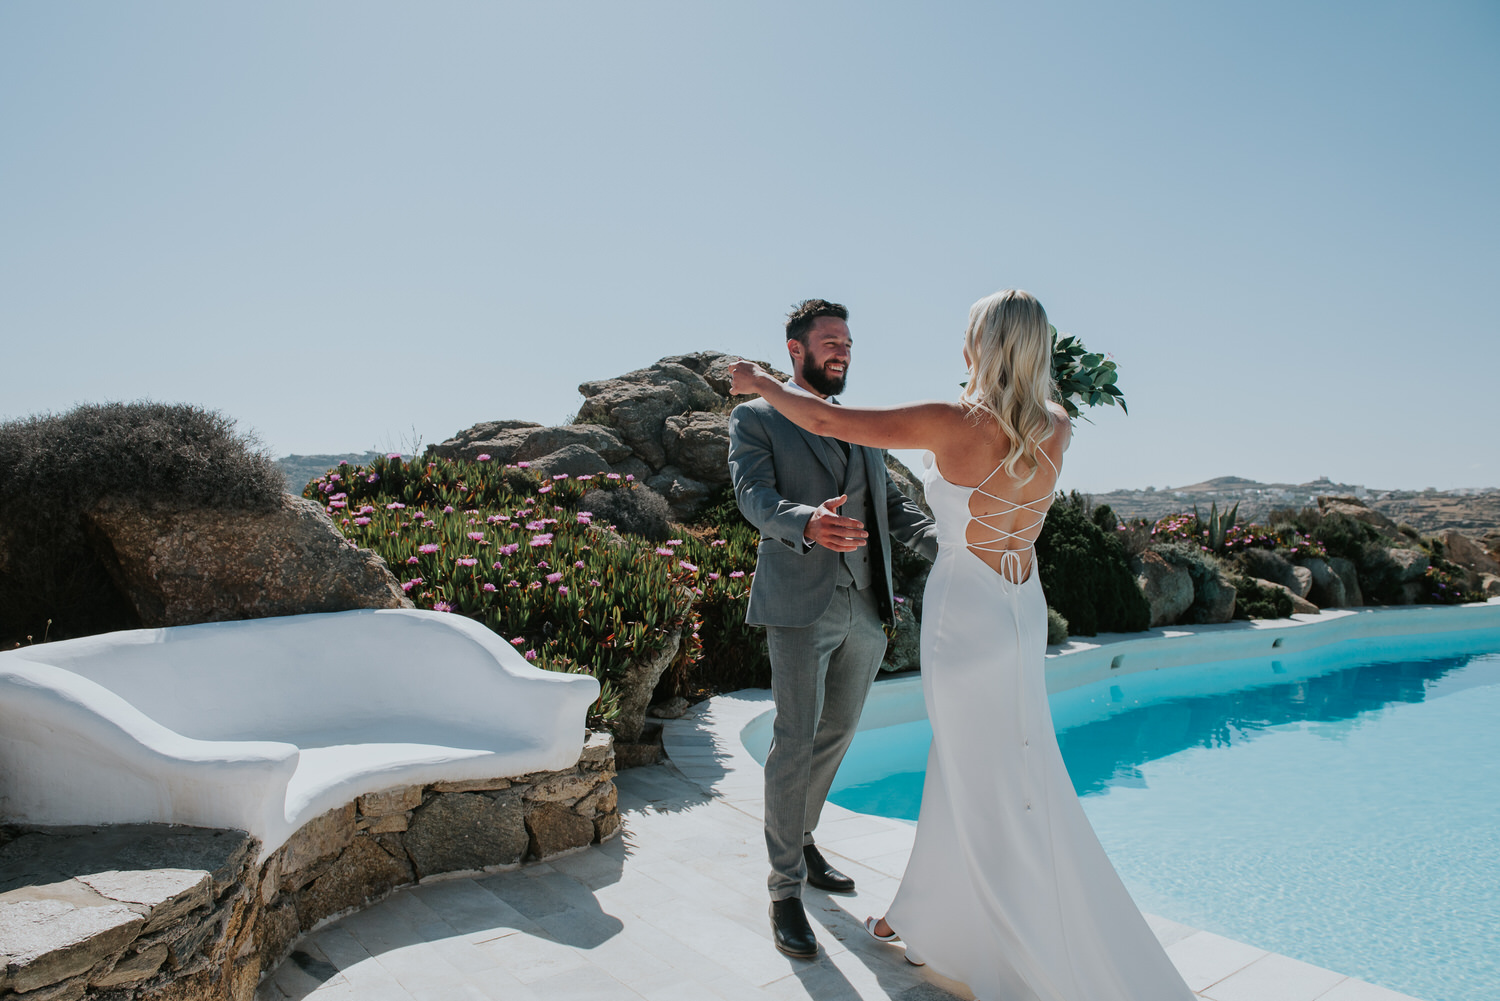 Mykonos wedding photographer: bride and groom going for a hug during first look next to the pool and the rocks in the background.